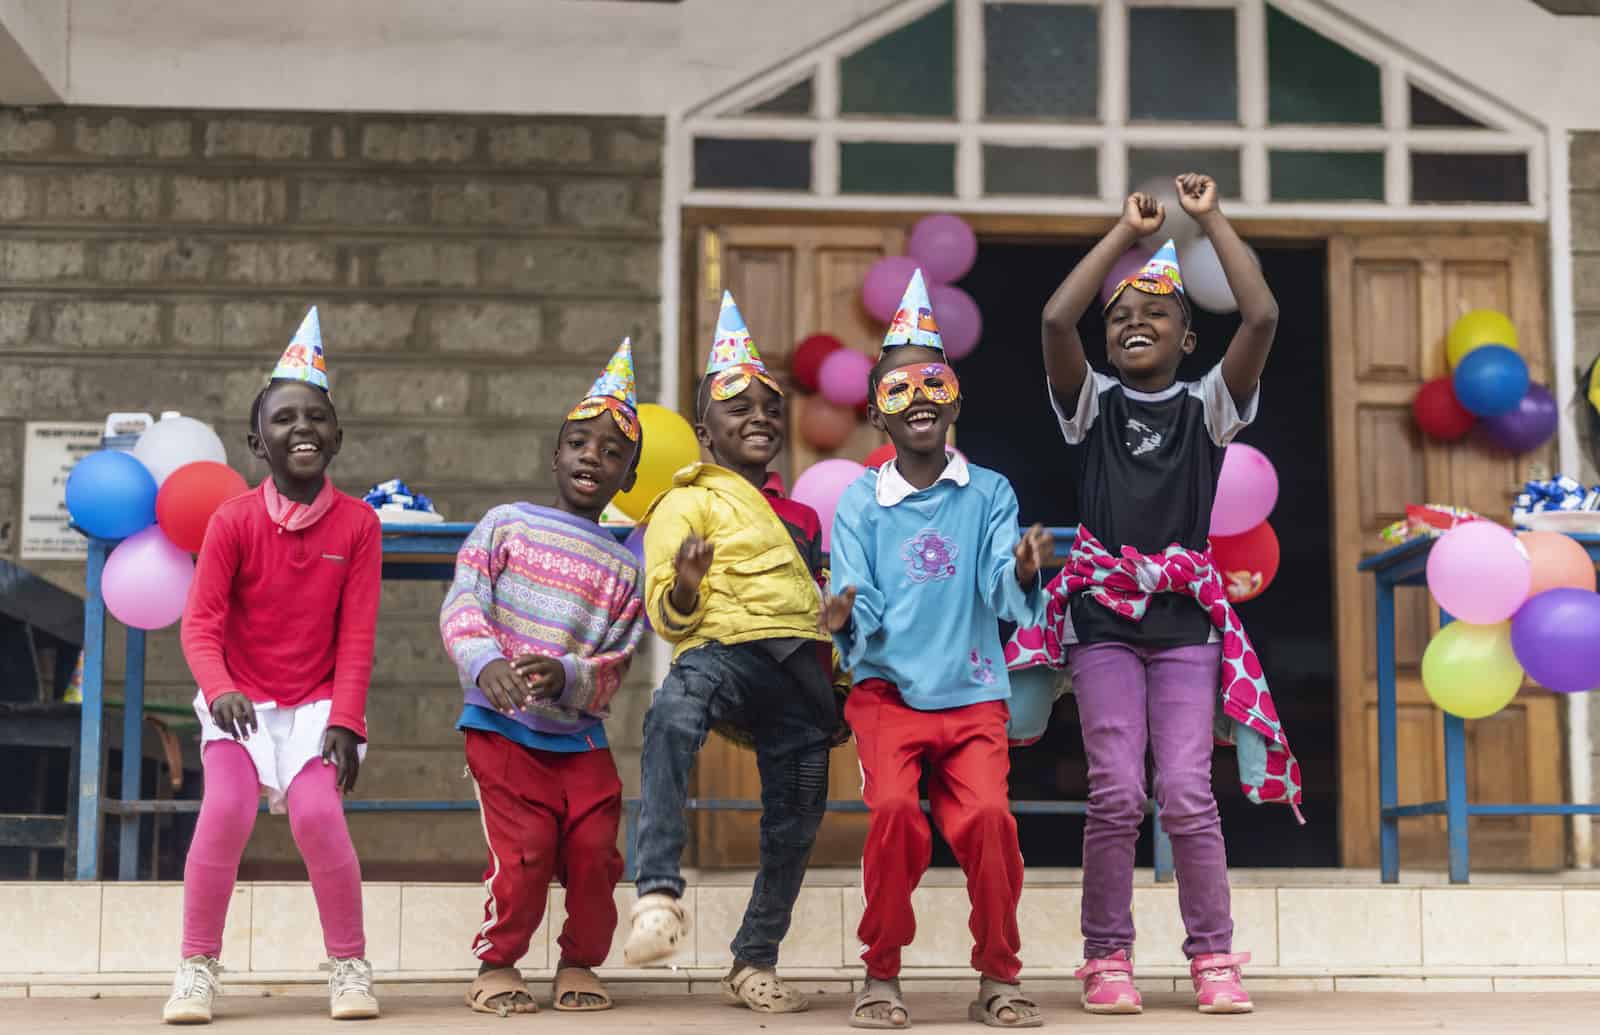 A group of children wearing party hats and party masks smile and dance outside a church.